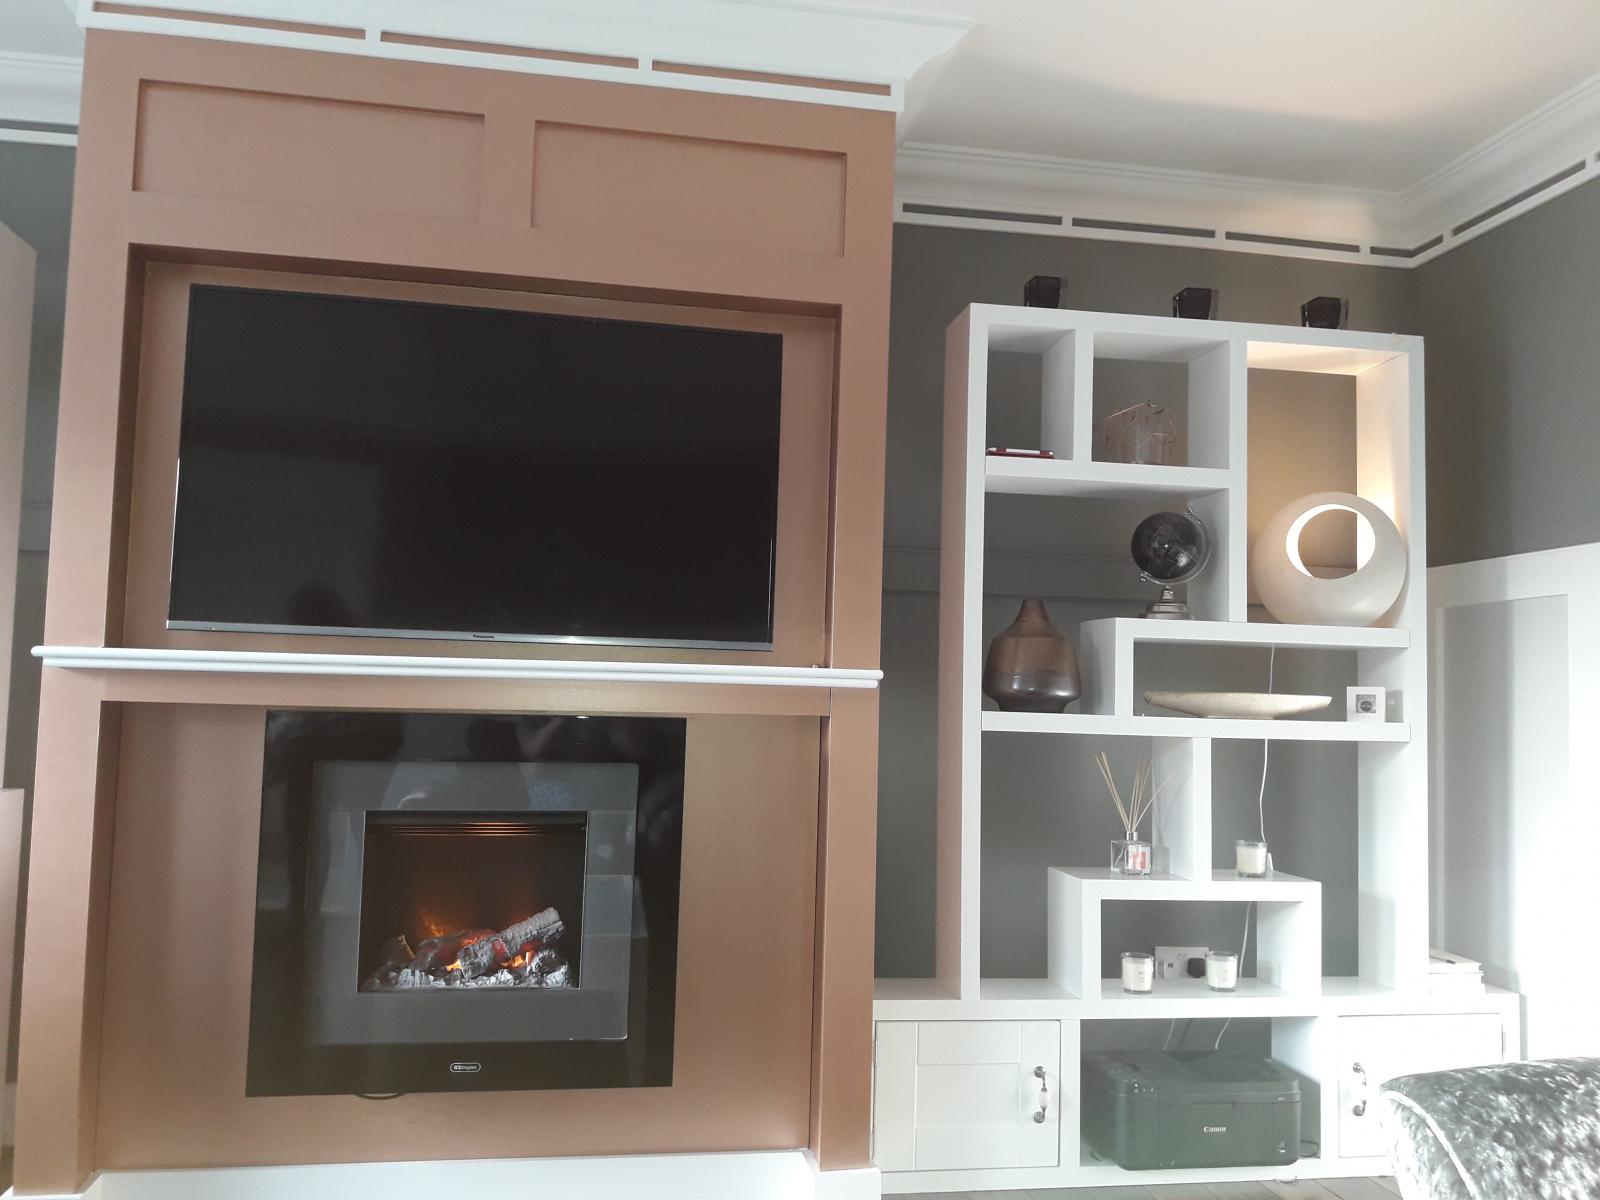 Wall Units with Fireplaces Inspirational Living Room Panelling and Wall Units • Chris toner Roofing